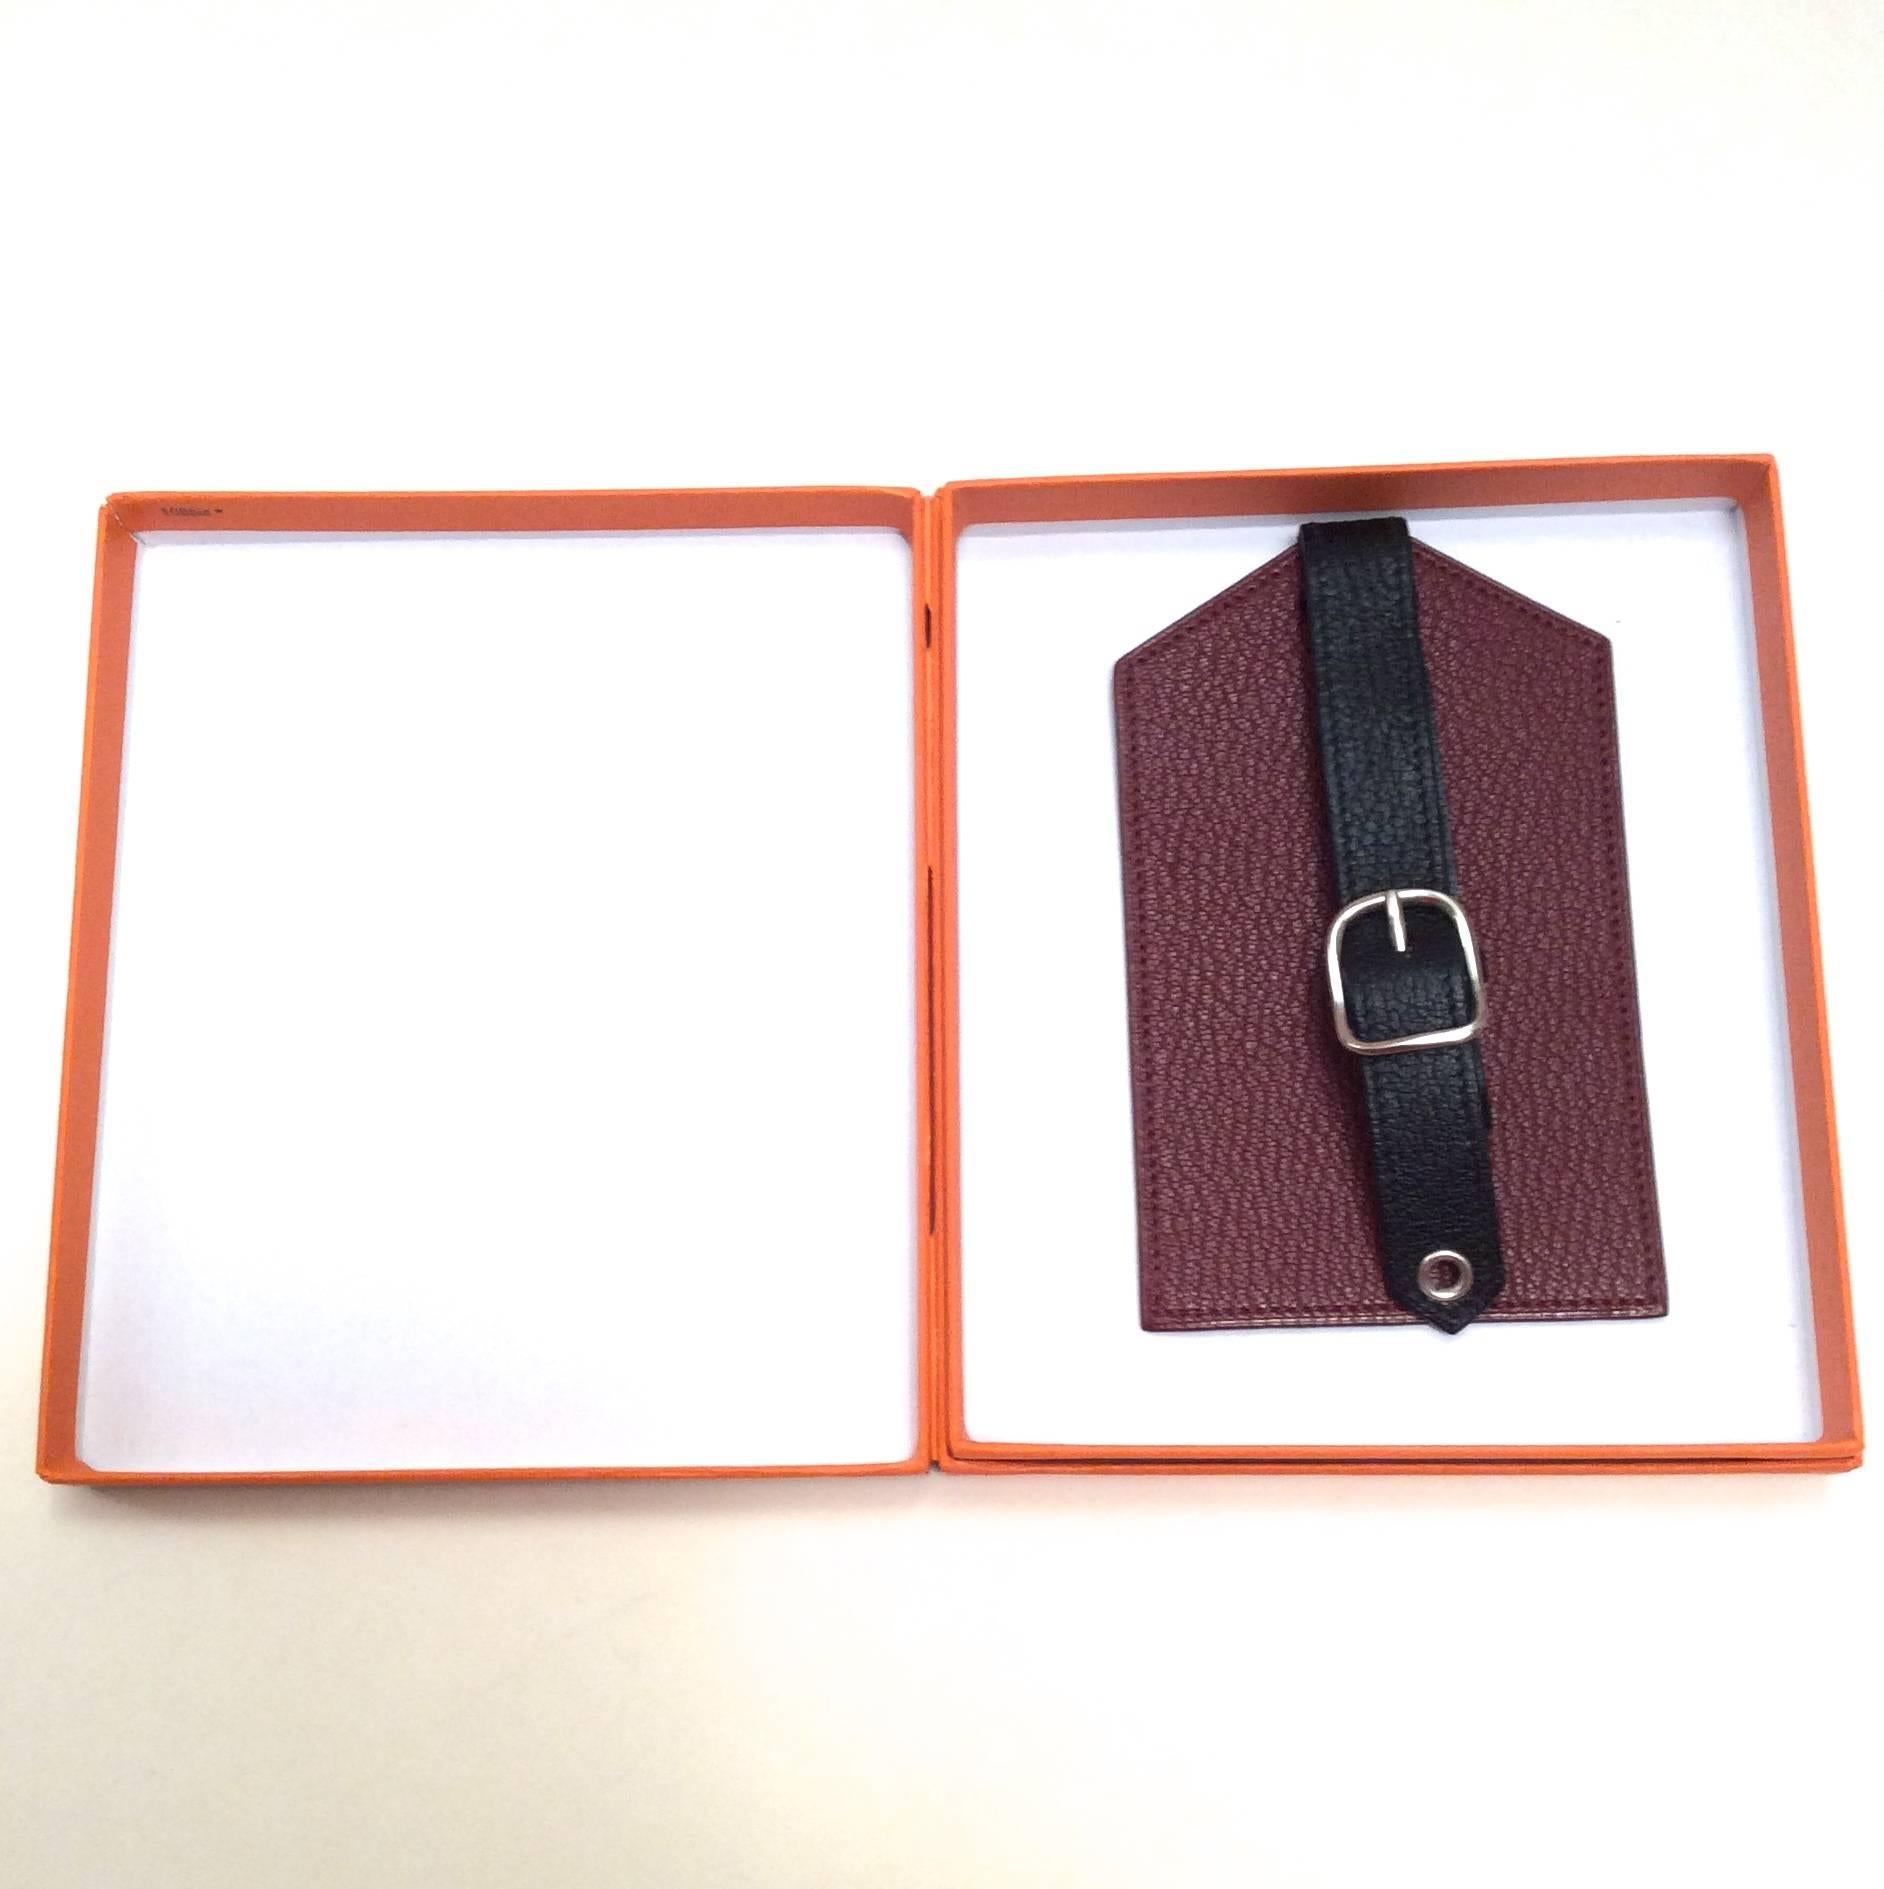 New Hermes Luggage Tag / Bag Charm - Red and Black For Sale 1